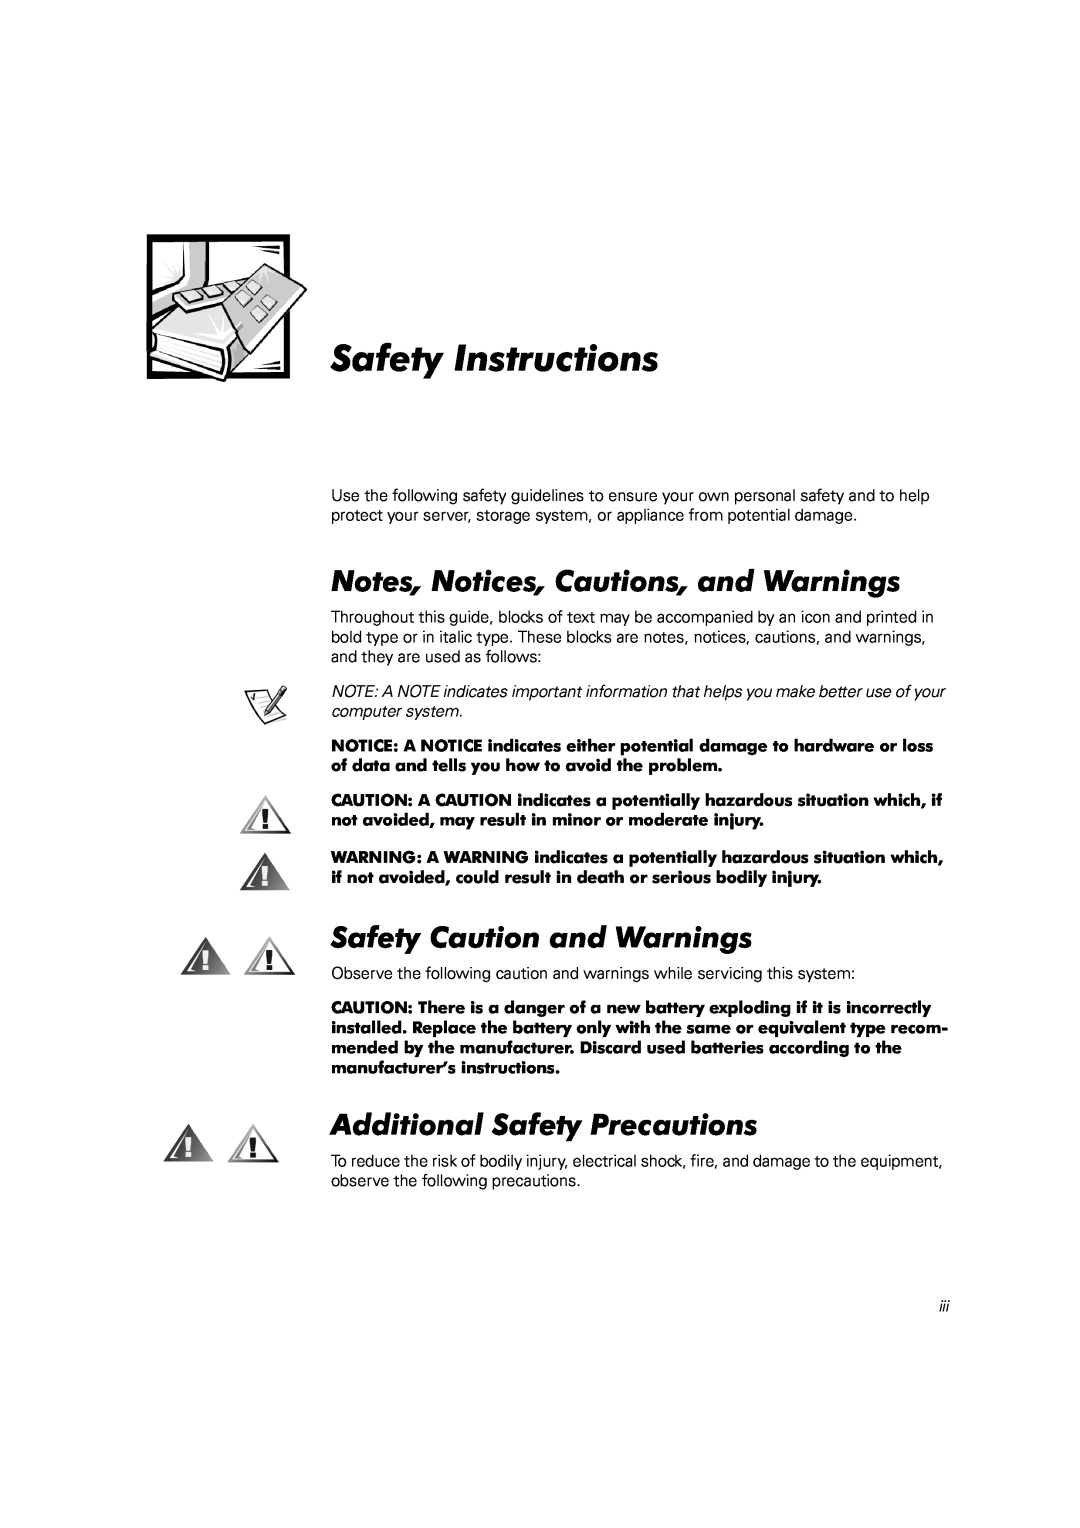 Dell 2400 manual Safety Instructions, Notes, Notices, Cautions, and Warnings, Safety Caution and Warnings 